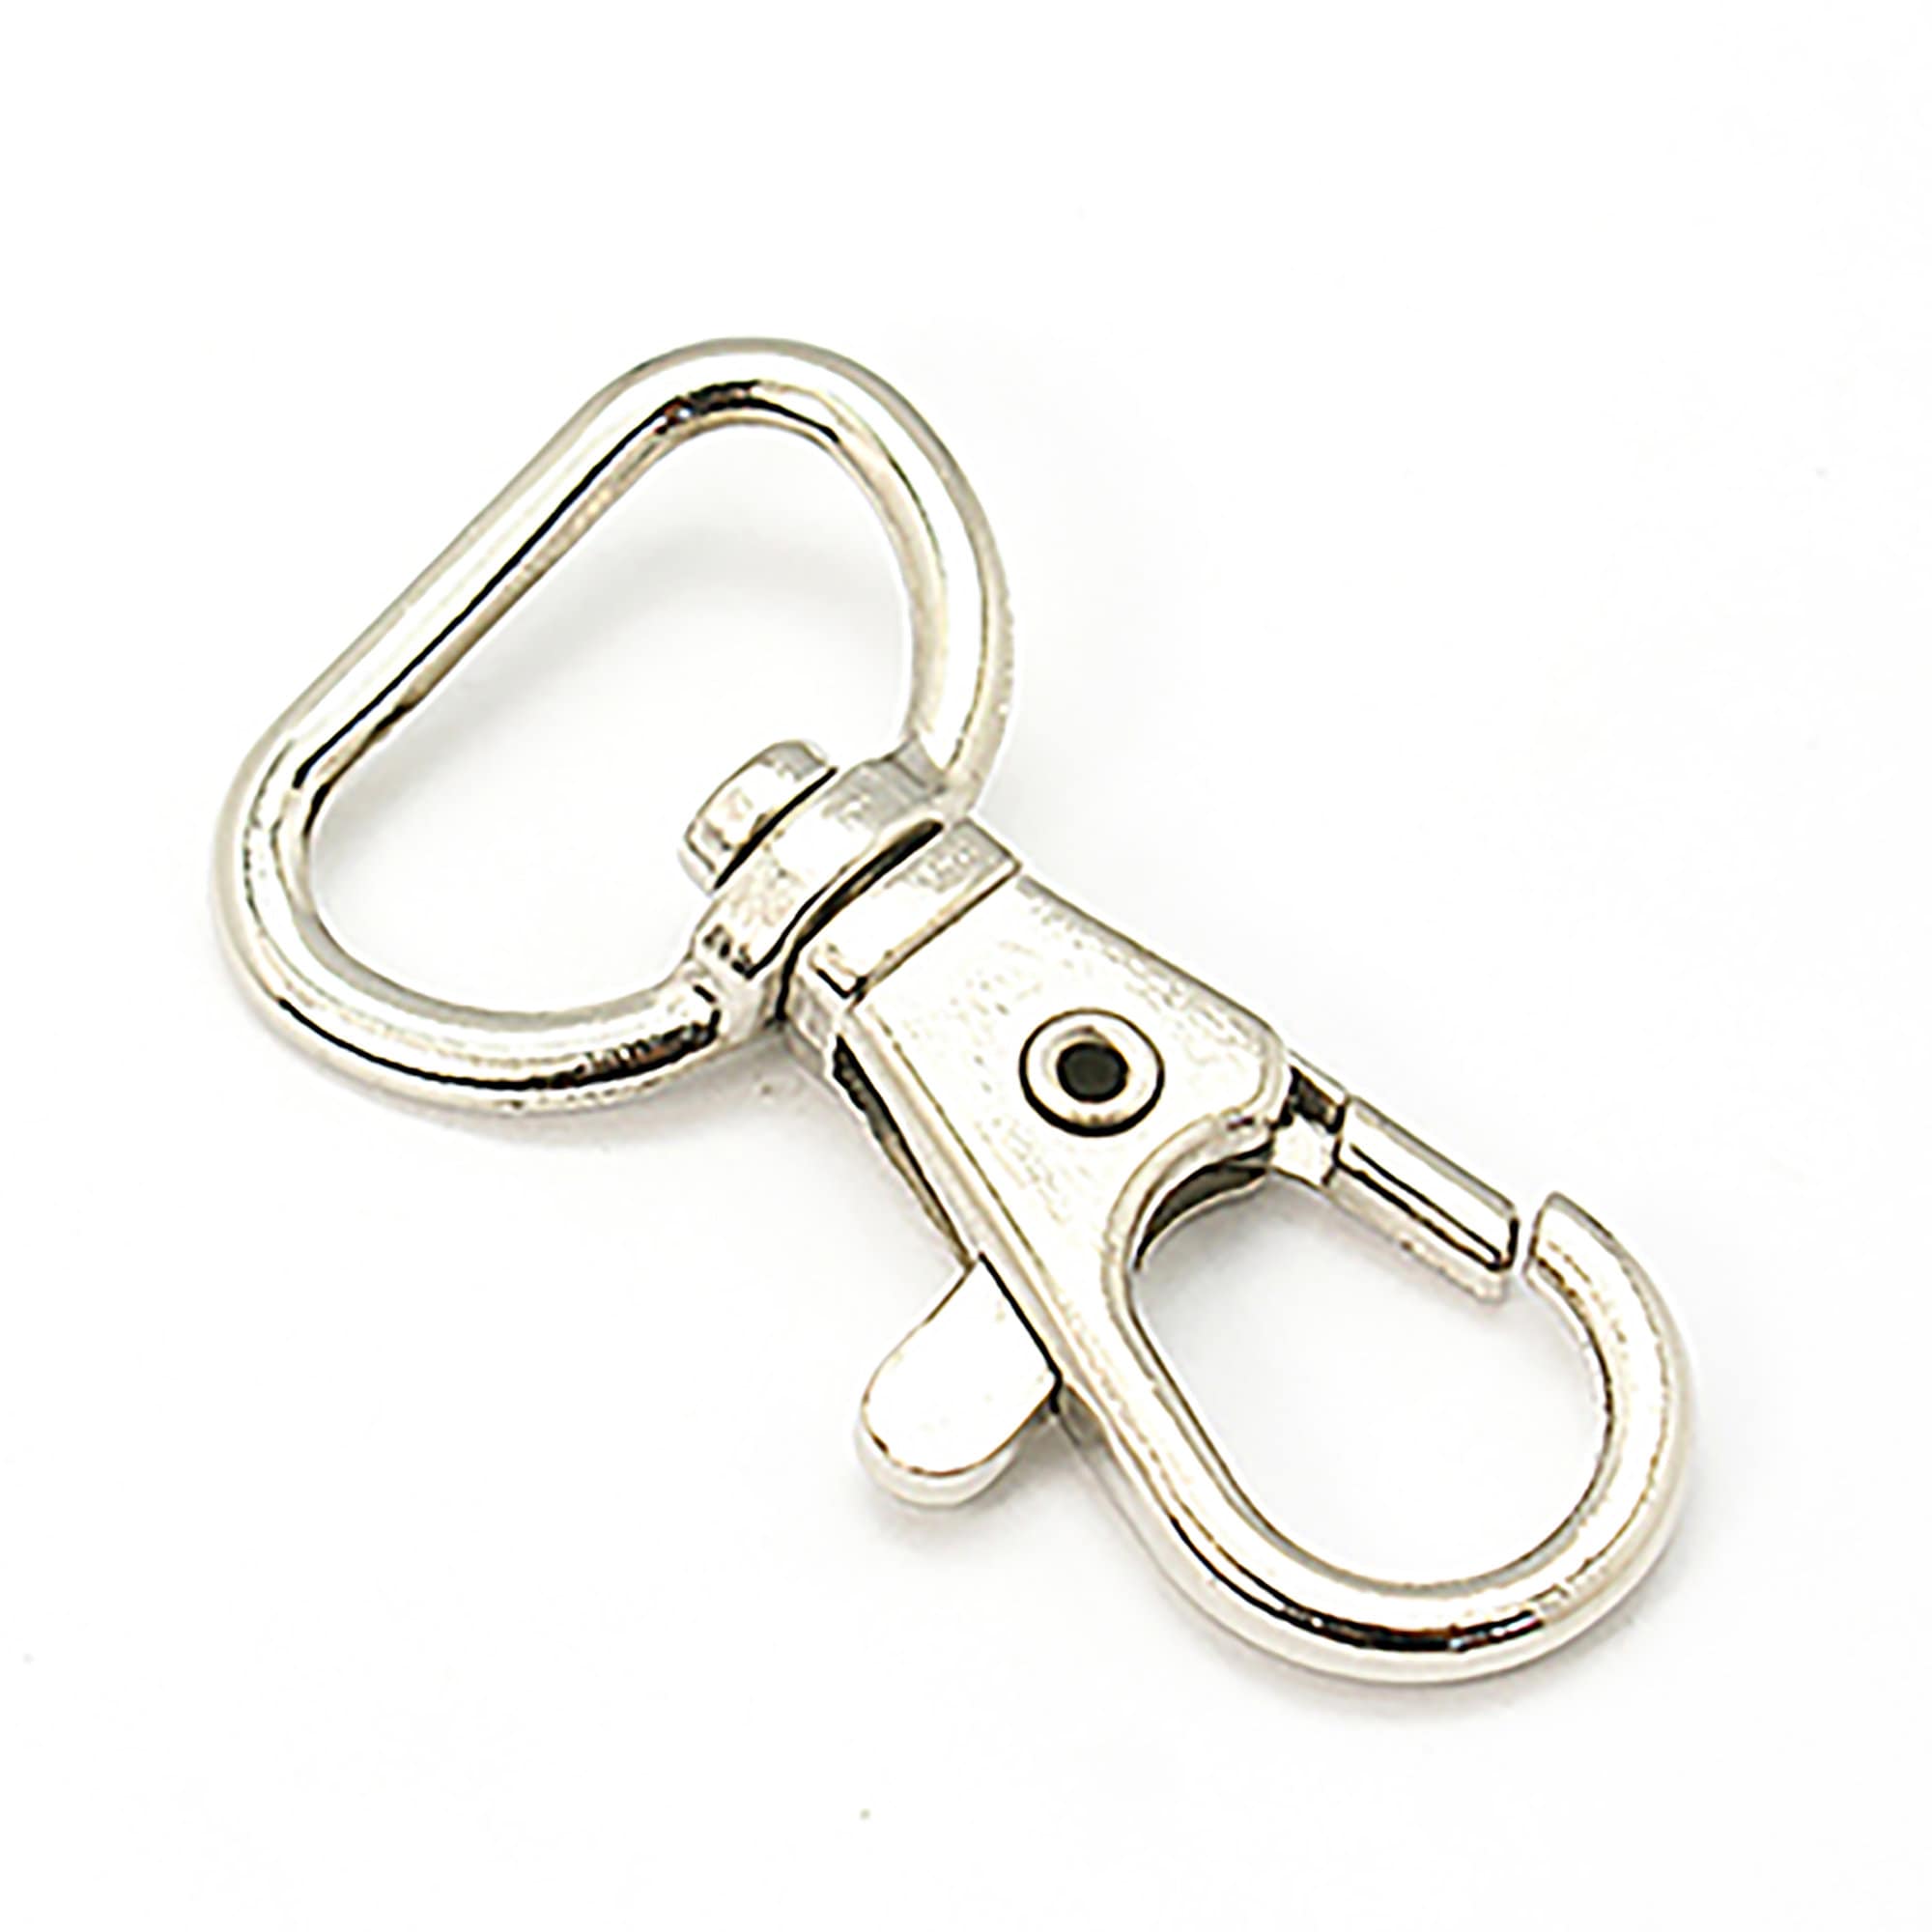 10pcs. Iron Swivel Lobster Claw Clasps for Lanyard, Swivel Snap